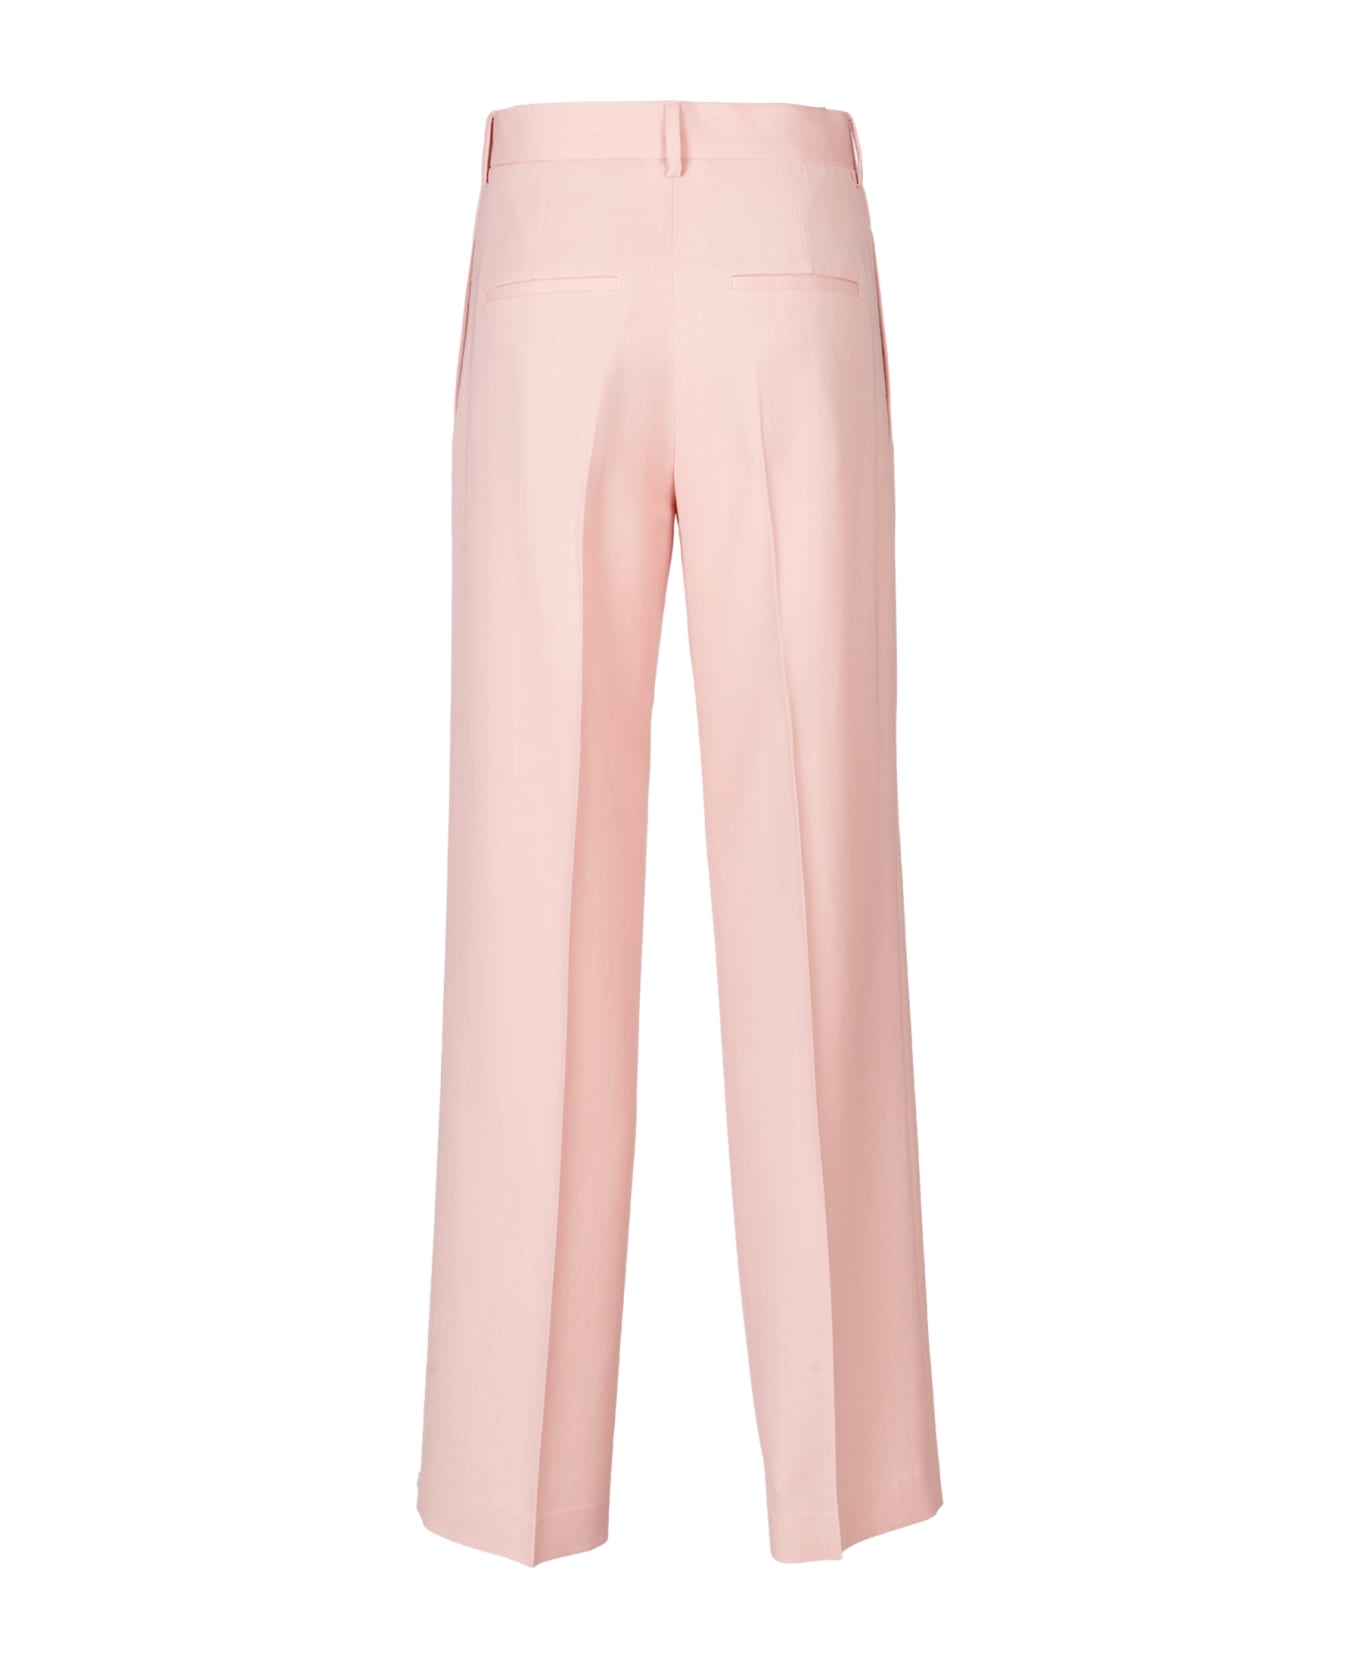 Paul Smith Trousers - Pink